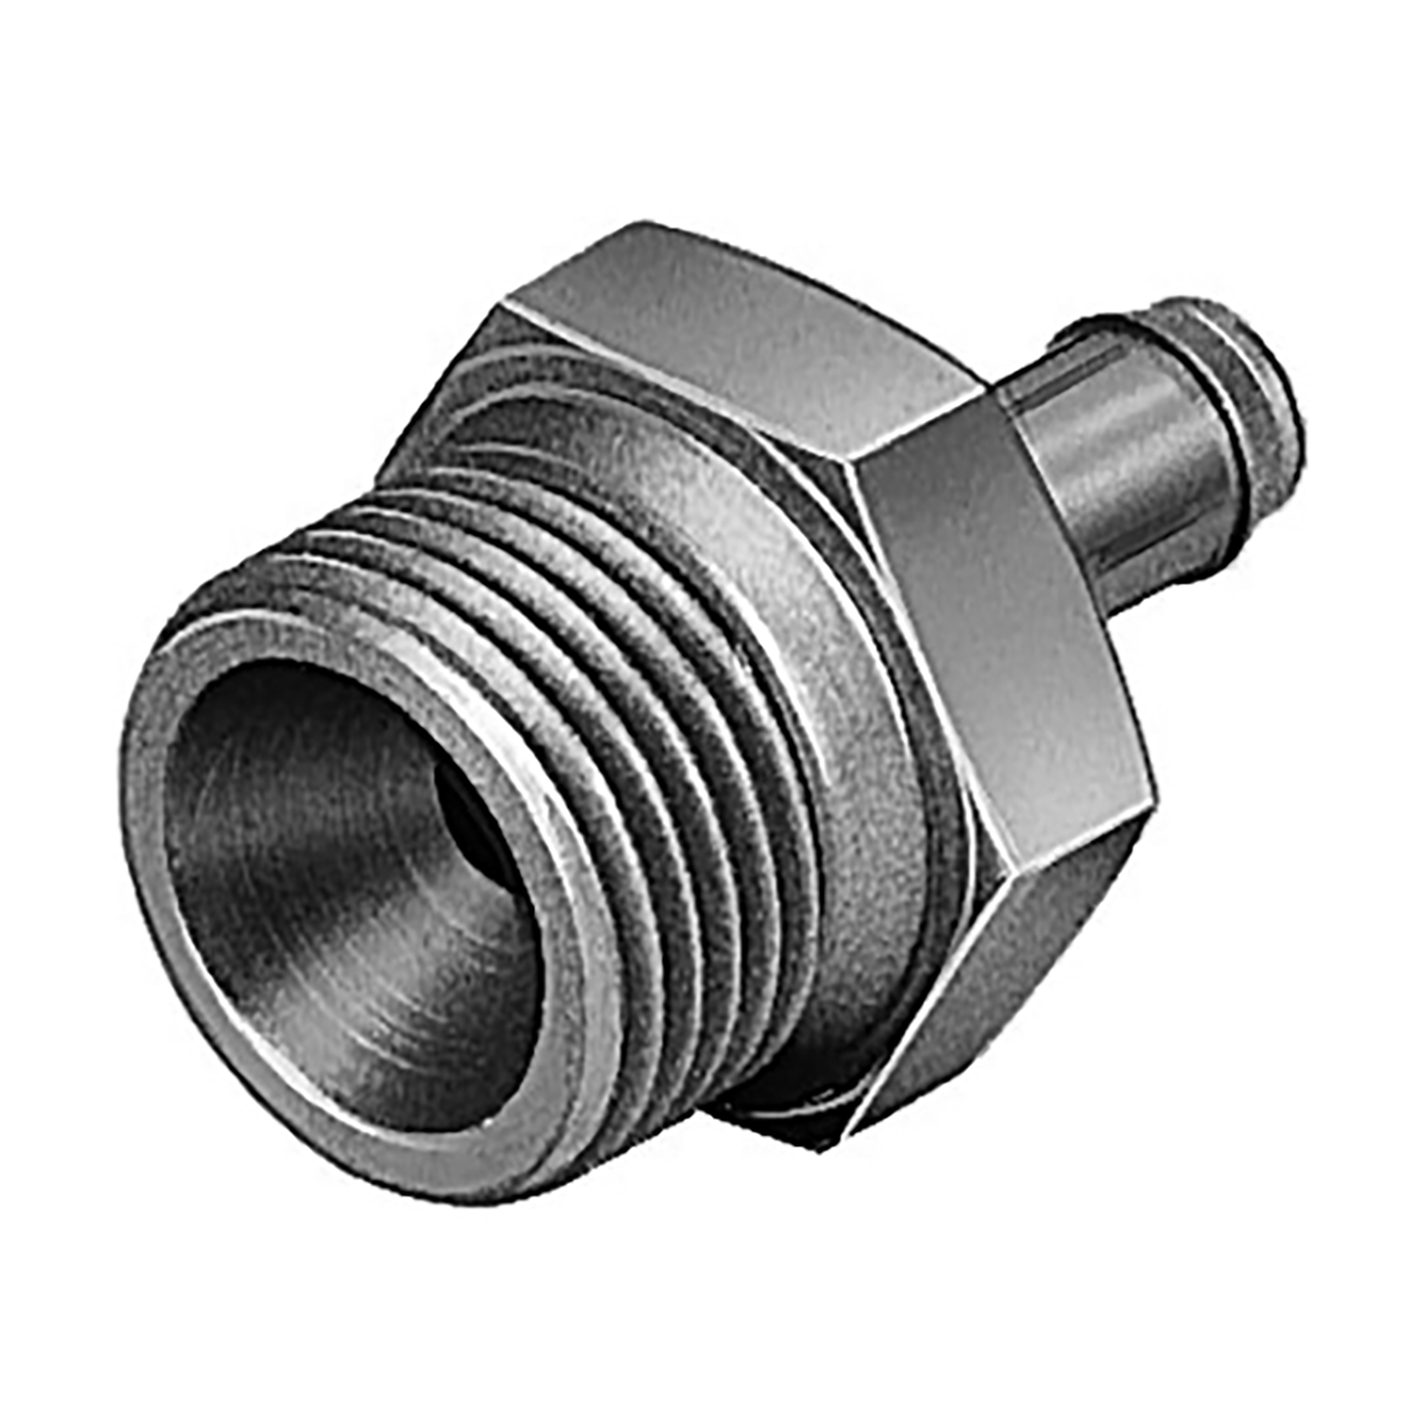 CRCN-1/8-PK-3 BARBED FITTING sold in multiples of 10 only